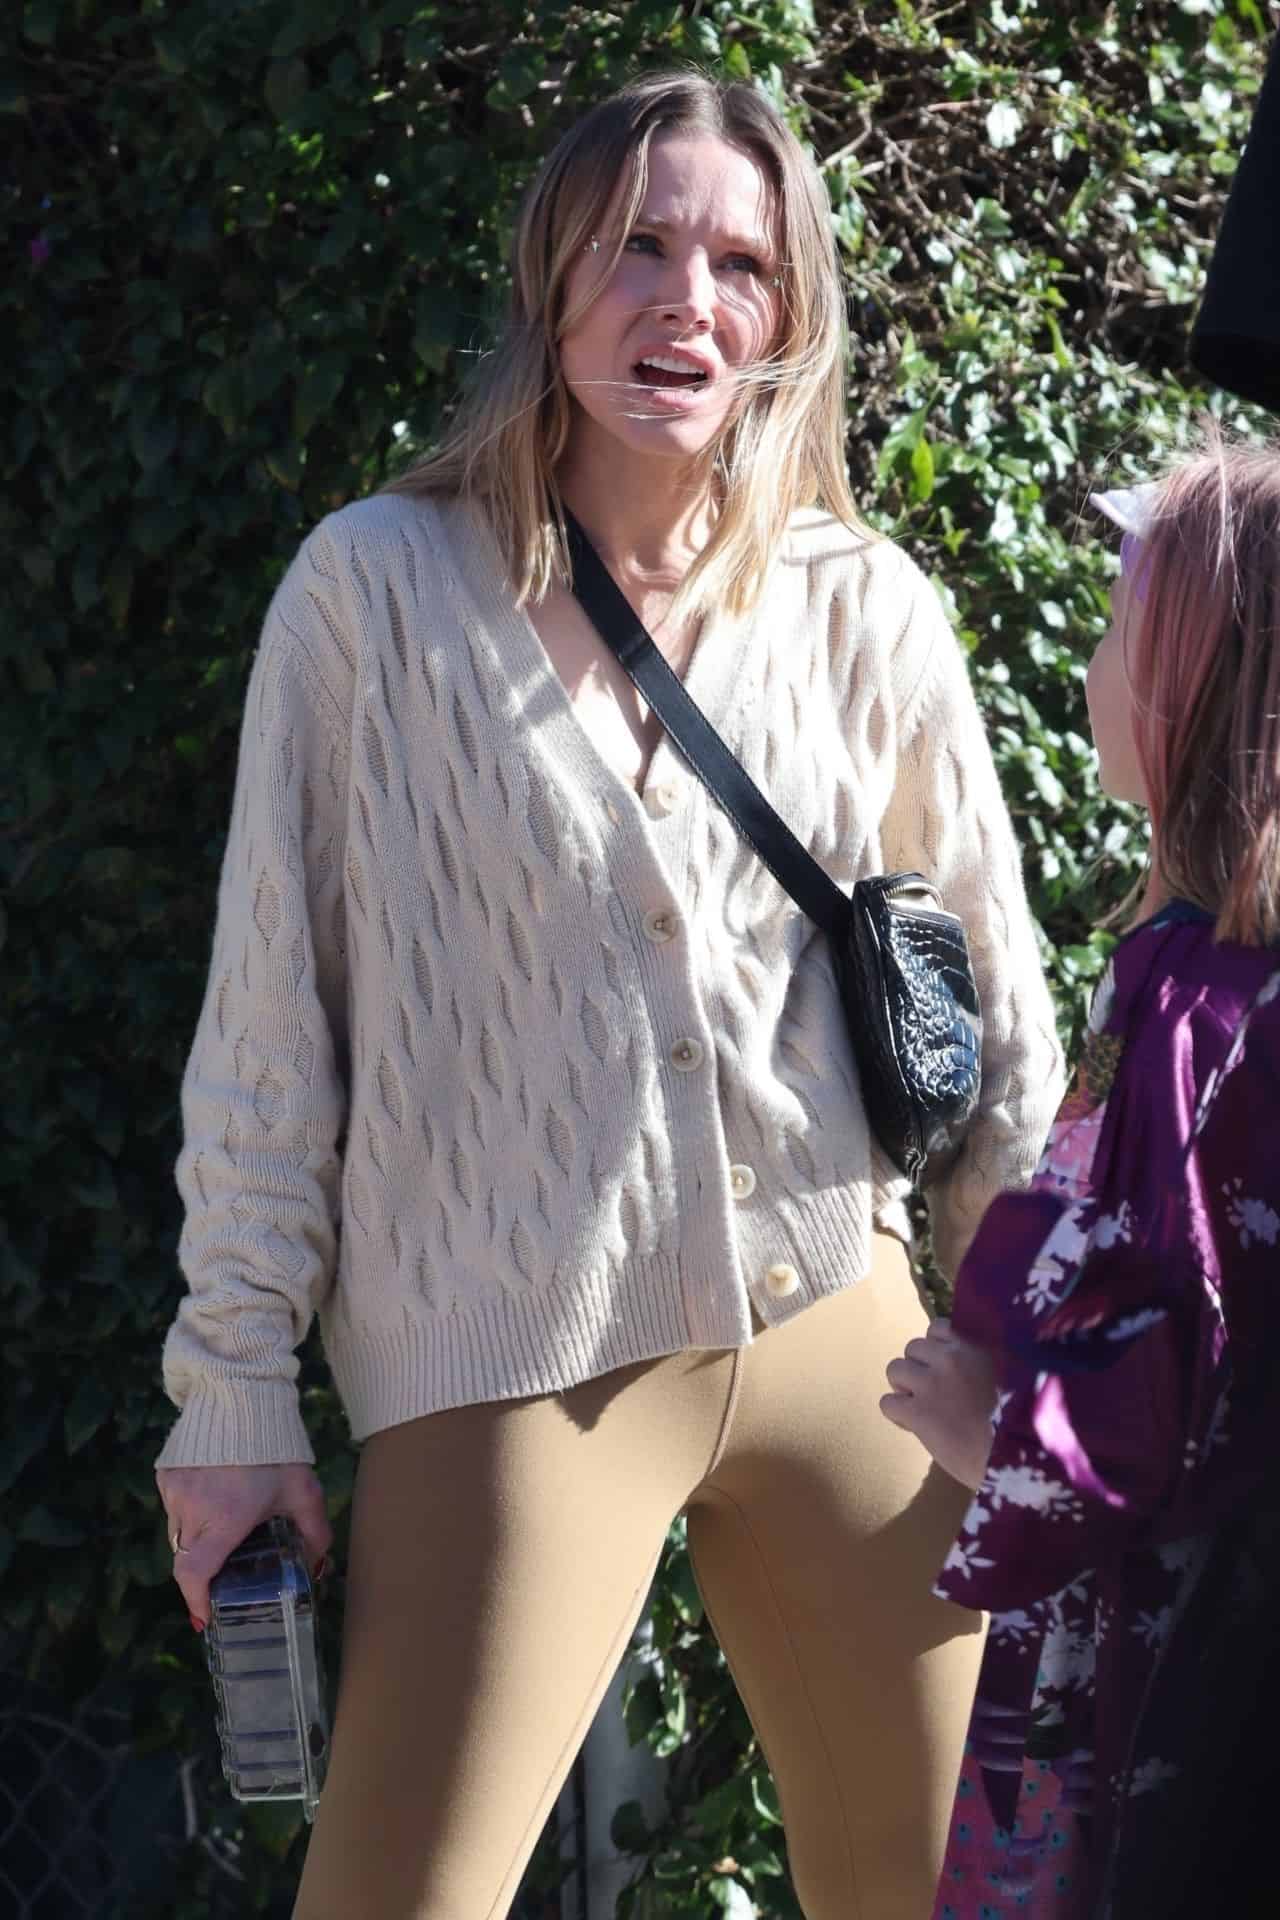 Kristen Bell Rocks Casual Look After Gym Session in Los Angeles